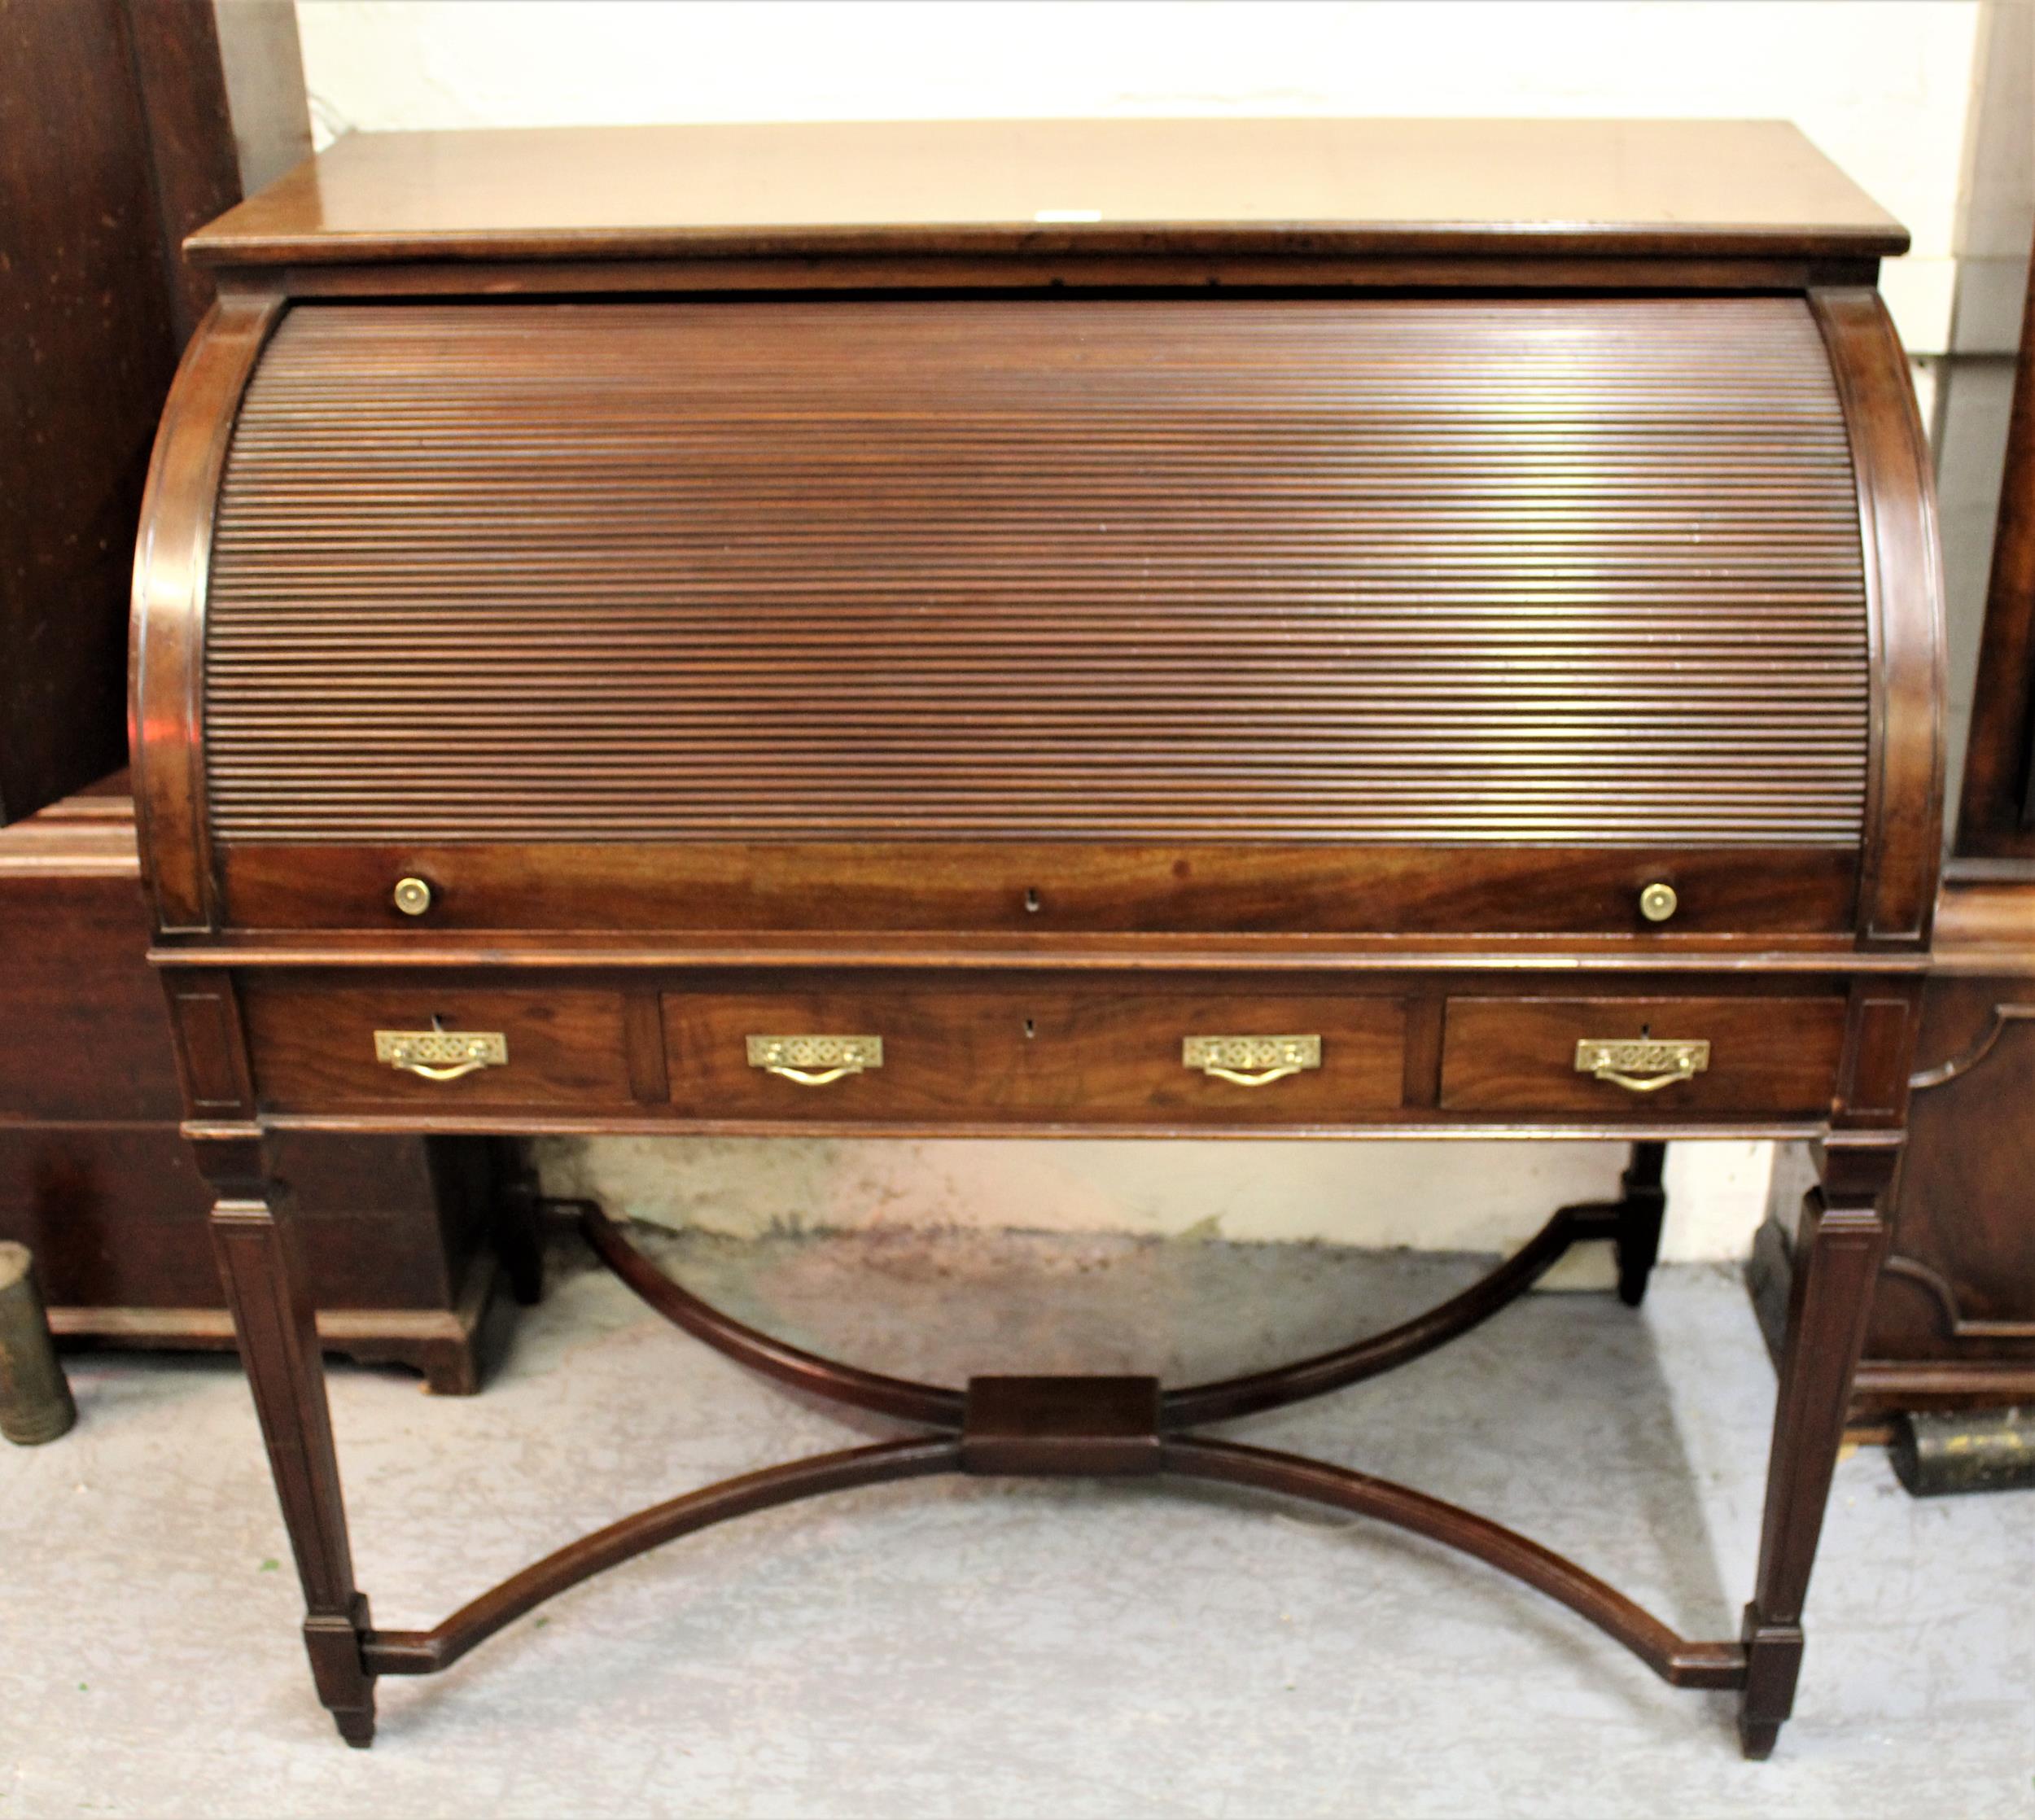 19th Century mahogany tambour desk opening to reveal a fitted interior with pull-out writing surface